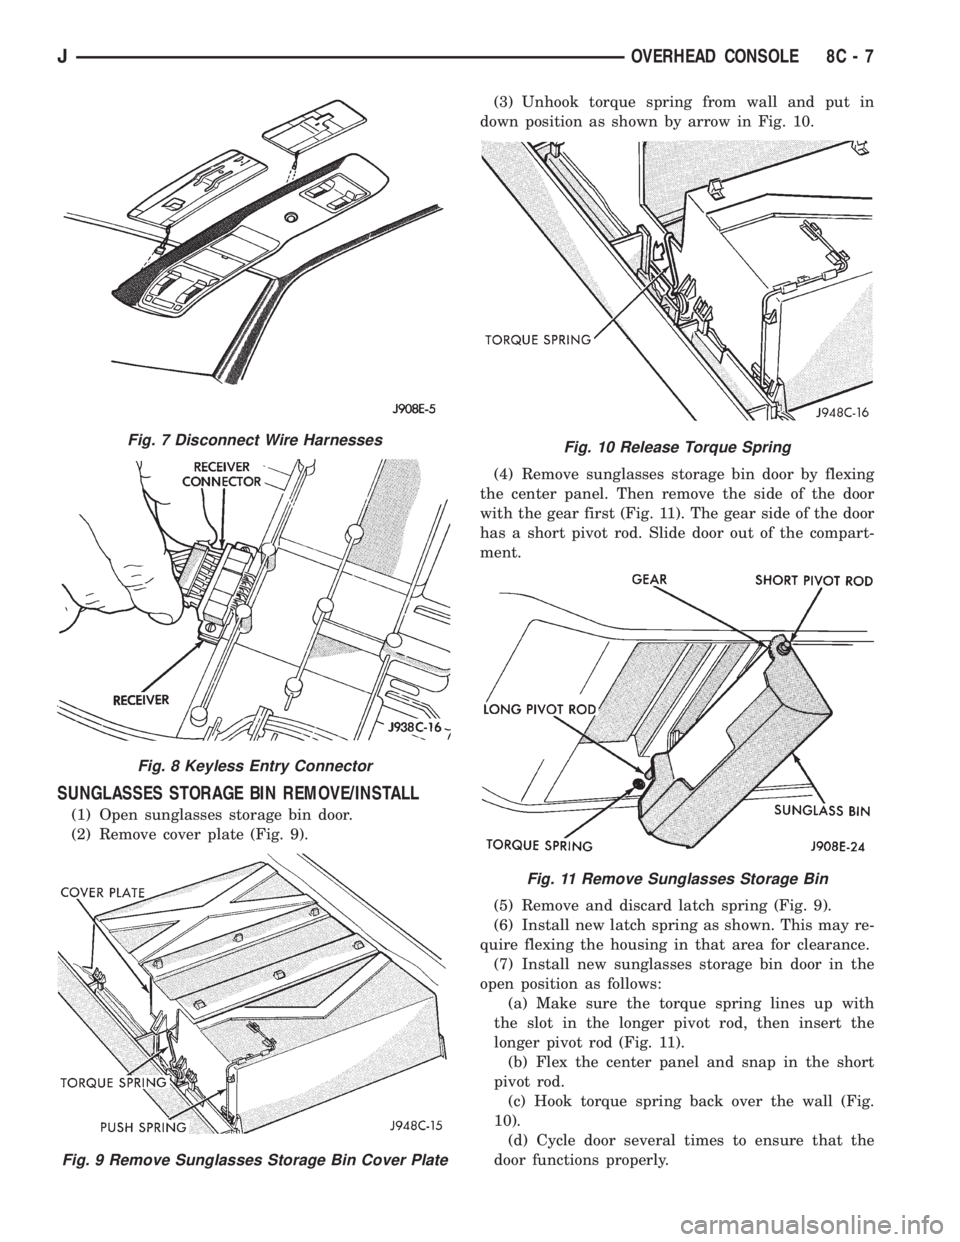 JEEP XJ 1995  Service And Repair Manual SUNGLASSES STORAGE BIN REMOVE/INSTALL
(1) Open sunglasses storage bin door.
(2) Remove cover plate (Fig. 9).(3) Unhook torque spring from wall and put in
down position as shown by arrow in Fig. 10.
(4